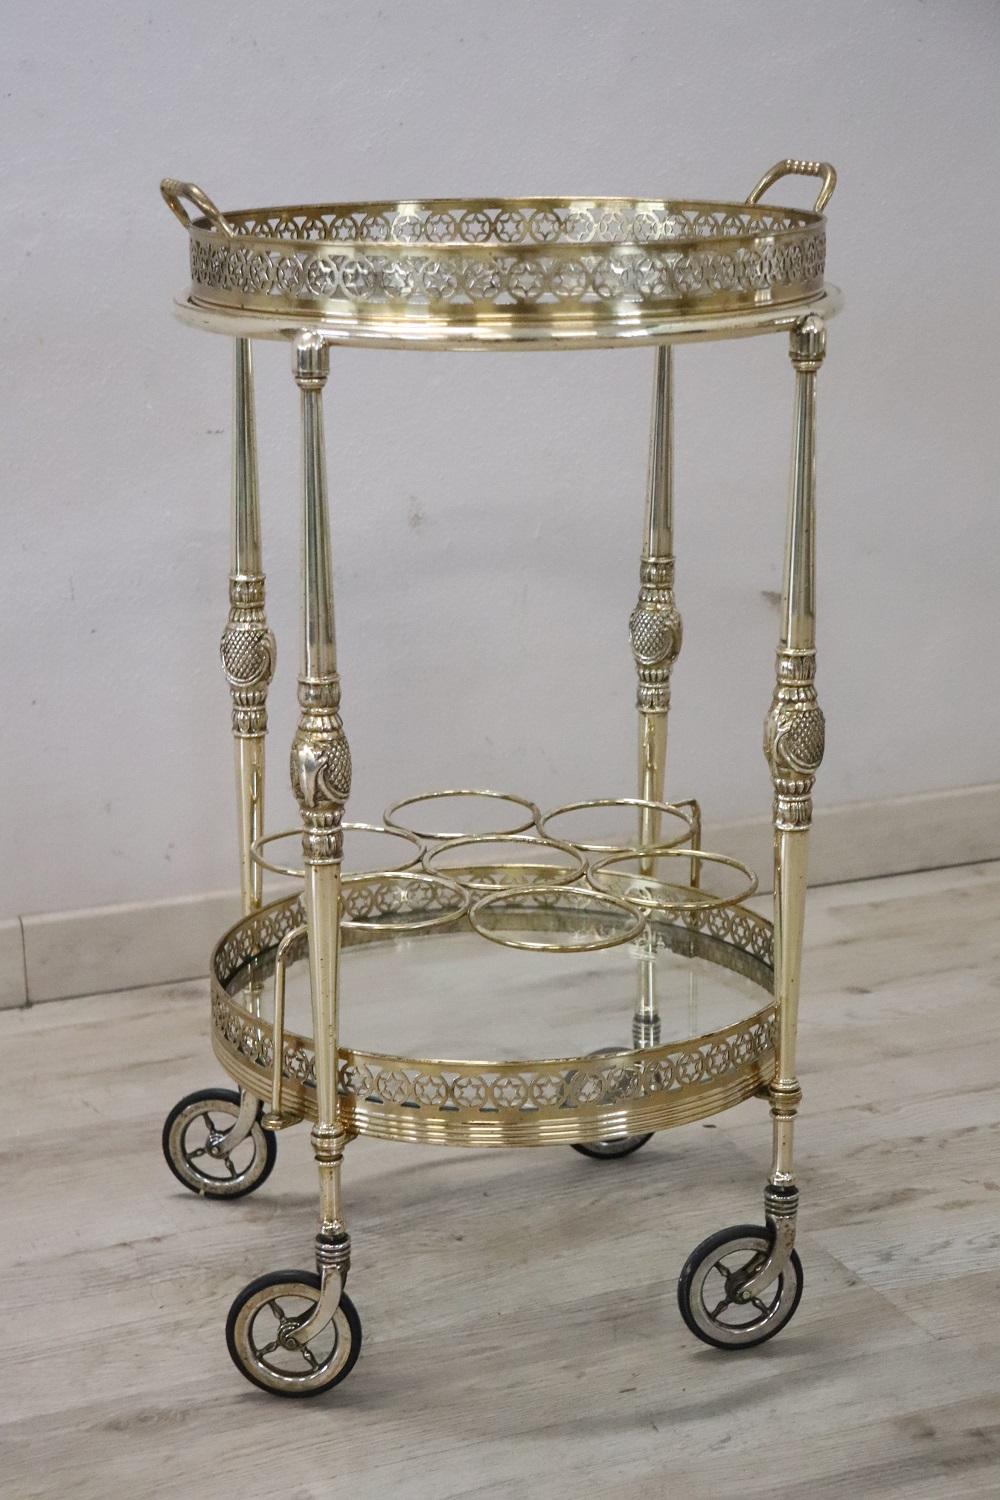 Rare drinks trolley Italian 1980s, it is made of golden brass and glass. The brass is finely worked. Comfortable wheels they allow easy movement. Equipped with one glass top, the top is equipped with handles and can be used as a tray to serve